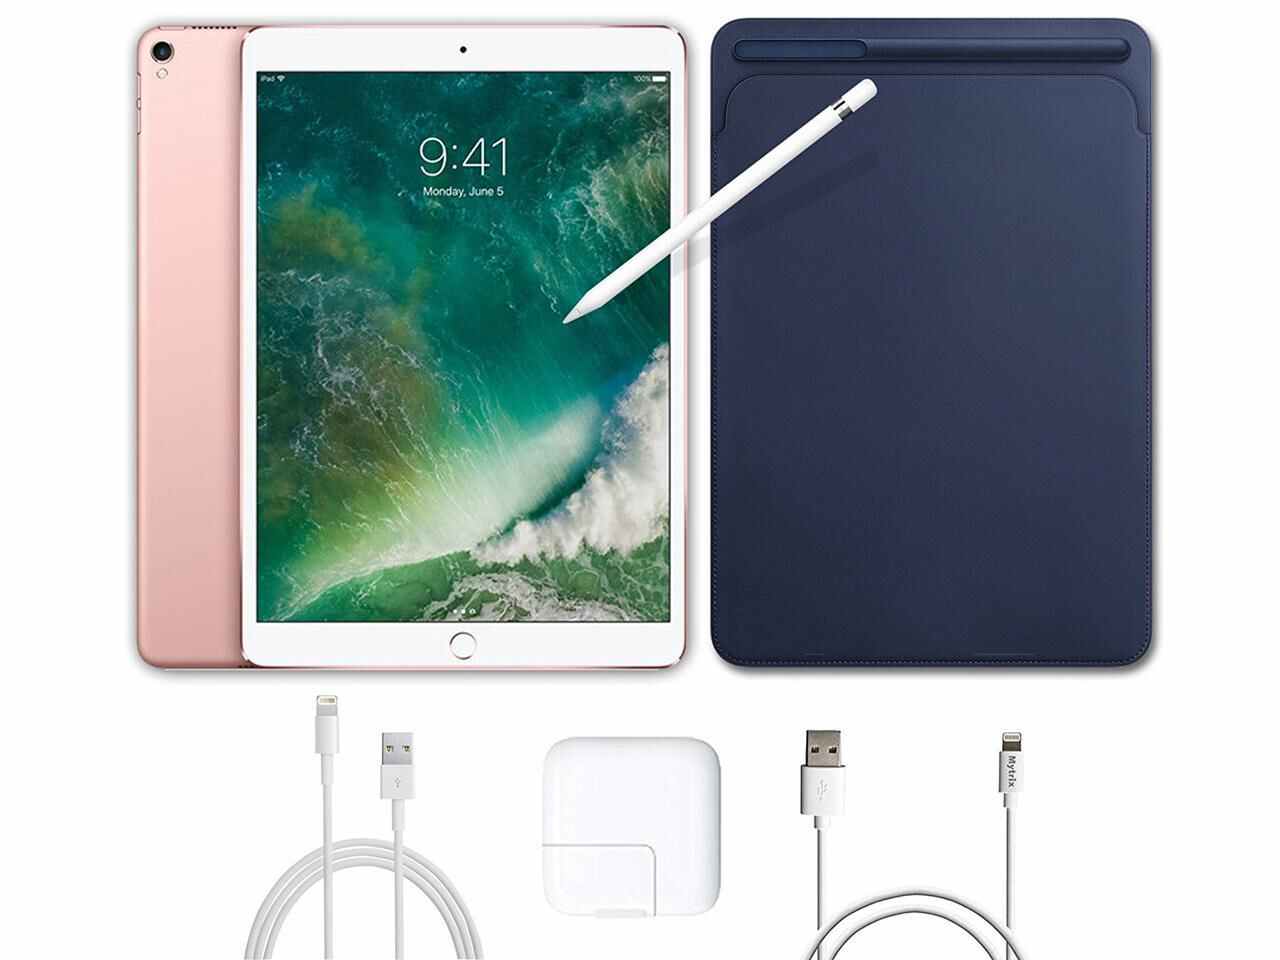 2017 New iPad Pro Bundle (4 Items): Apple 10.5 inch iPad Pro with Wi-Fi 256 GB Rose Gold, Midnight Blue Leather Sleeve, Apple Pencil and Mytrix USB Apple Lightning Cable